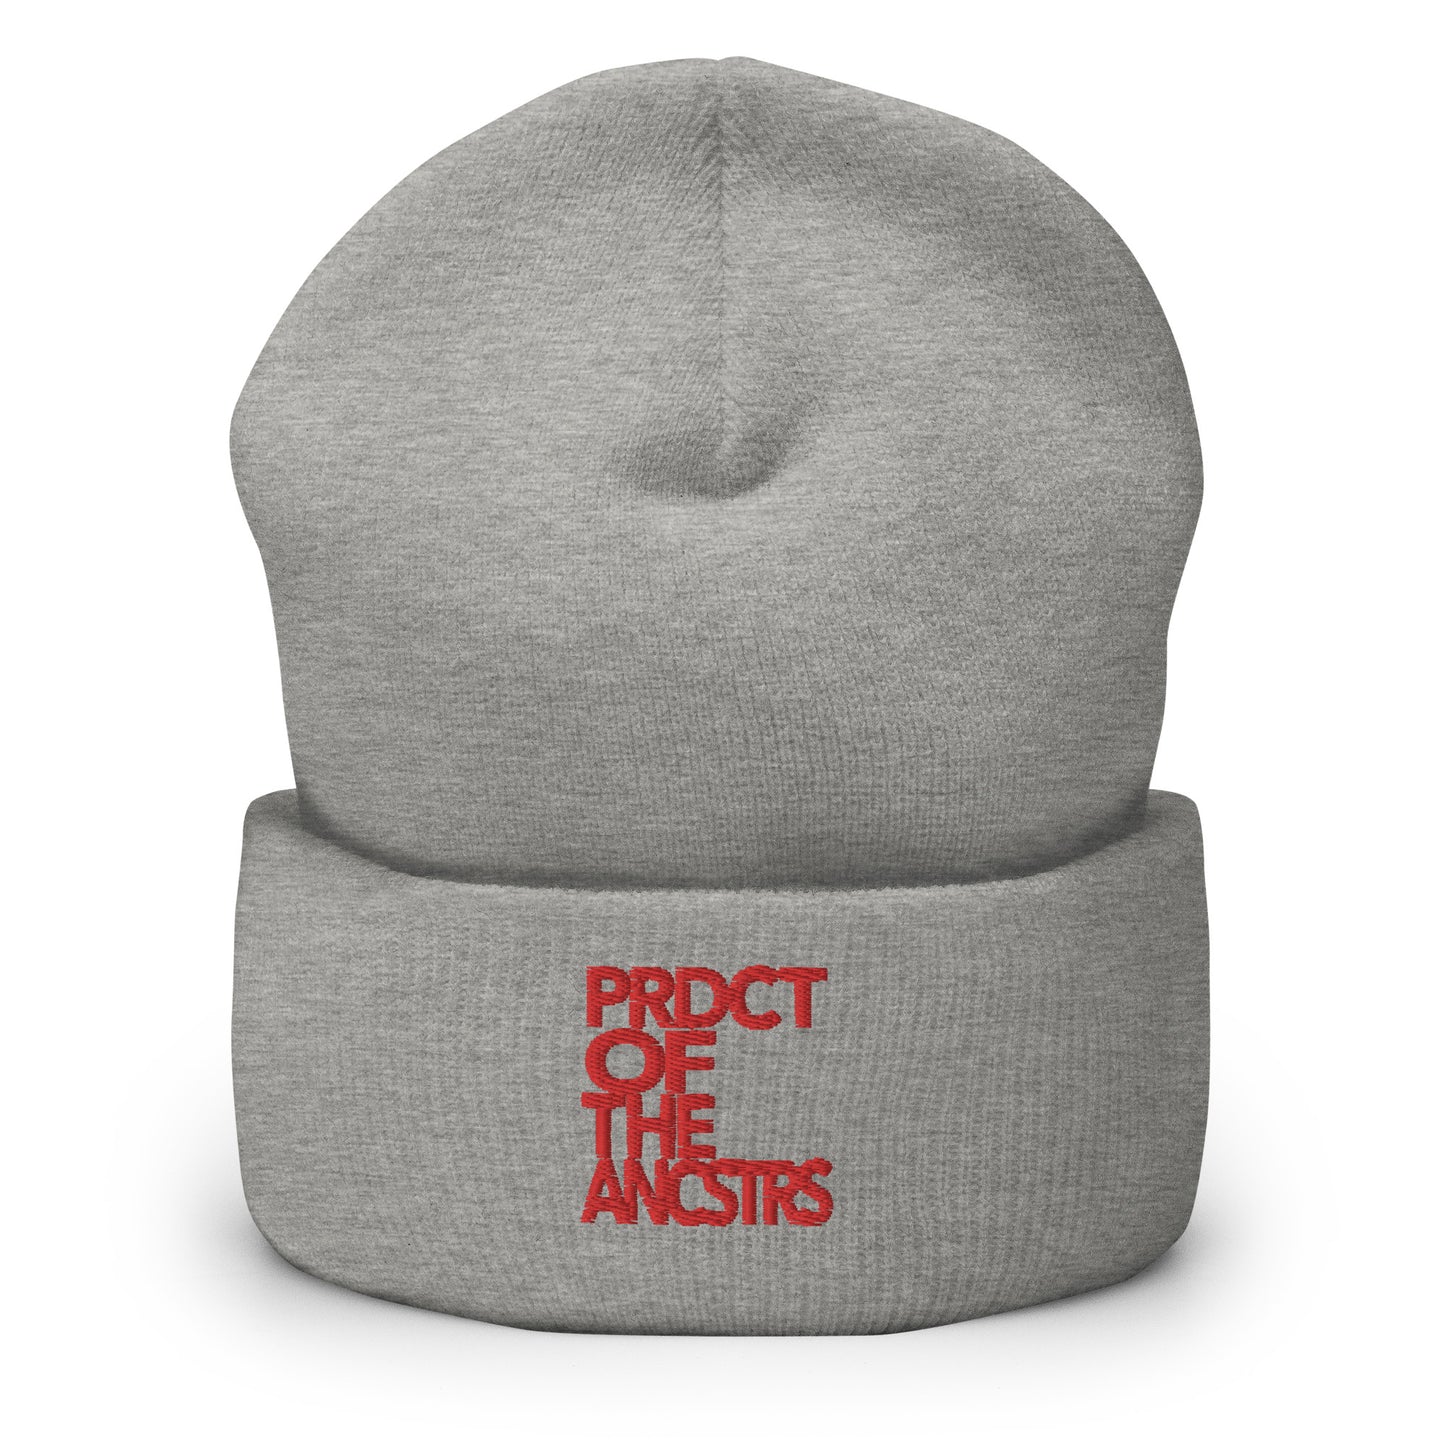 "Product of the Ancestors" Beanie (Limited Edition)